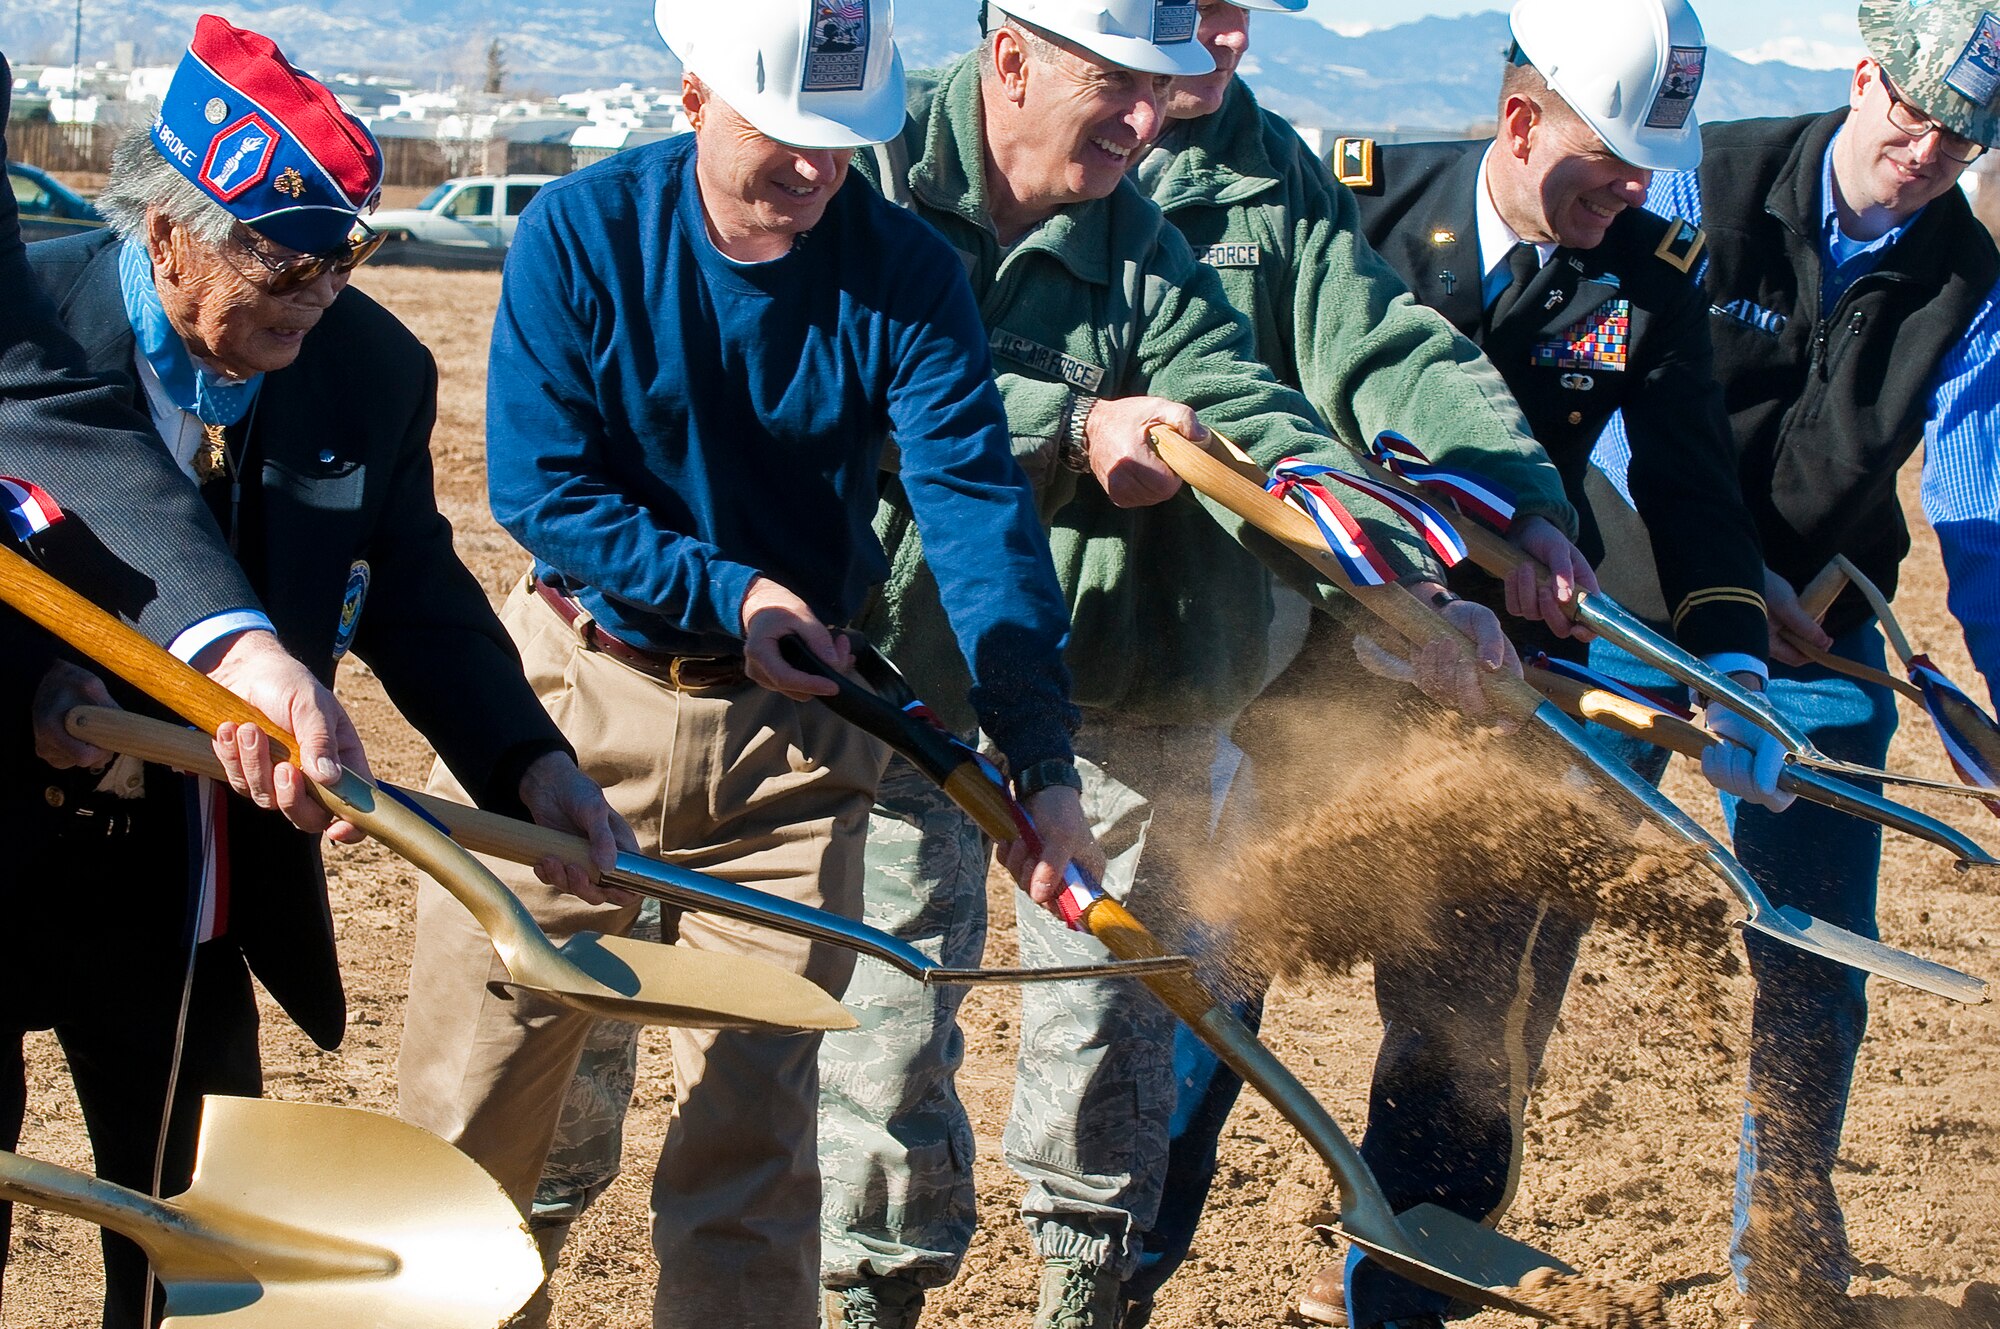 Ground is broken for the Colorado Freedom Memorial Feb. 2, 2013, in Aurora, Colo. The memorial is a 12-year effort led by Rick Crandall and members for the CFM Foundation. The memorial will list the names of all Colorado service members who died during combat operations on foreign soil since Colorado became a state. The first member named is Pvt. Fred Springstead, a Colorado National Guard member who was killed by a sniper during the Spanish-American War. He was also one of the first 10 Americans to be killed in that war. His comrades not only went on to capture Manila, but upon their return to Colorado, they formed the Veterans of Foreign Wars, naming Denver VFW Post 1. (Colorado Air National Guard photo by Capt. Darin Overstreet/Released)